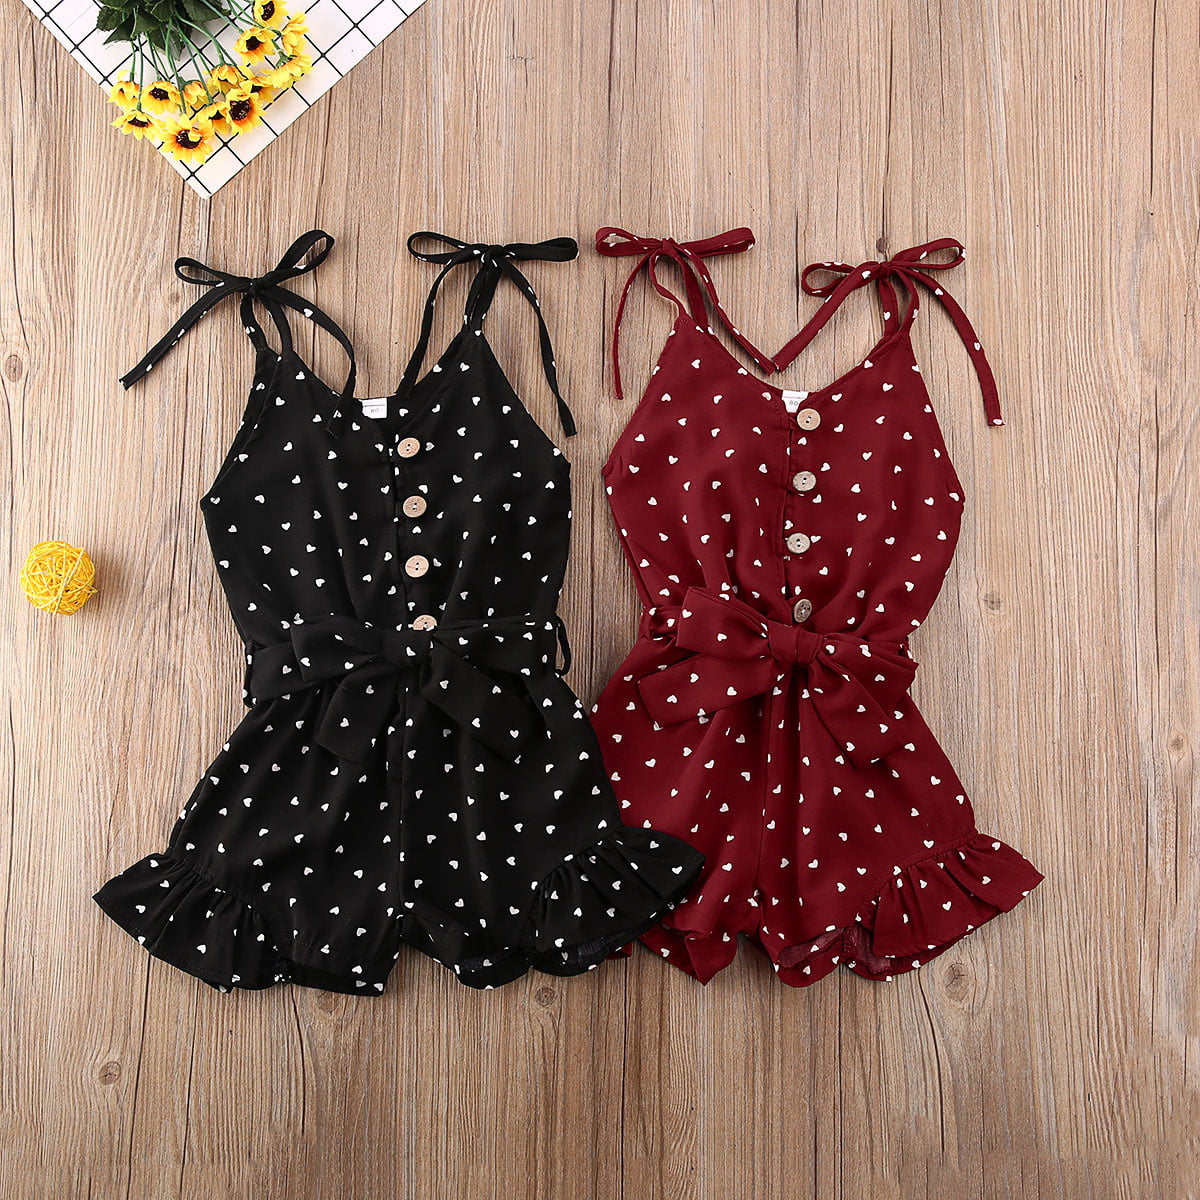 Infant Baby Girl Spaghetti Strap Romper Floral Jumpsuit Sleeveless Bodysuit One Piece Sunsuit Summer Clothes 